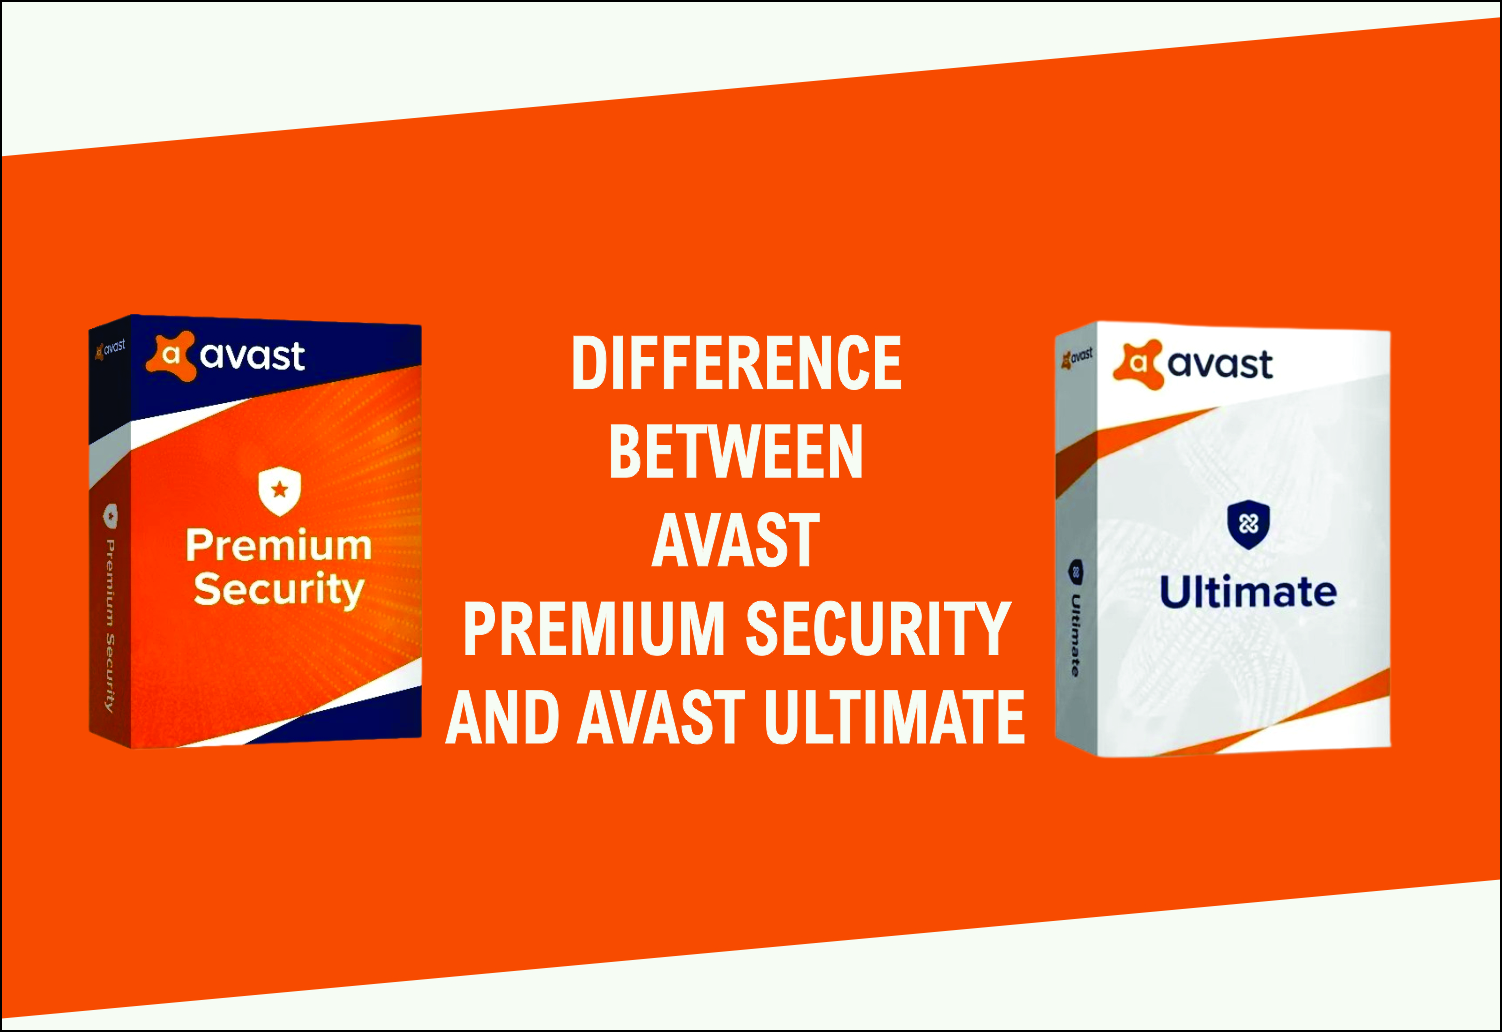 Difference-Between-Avast-Premium-Security-and-Avast-Ultimate